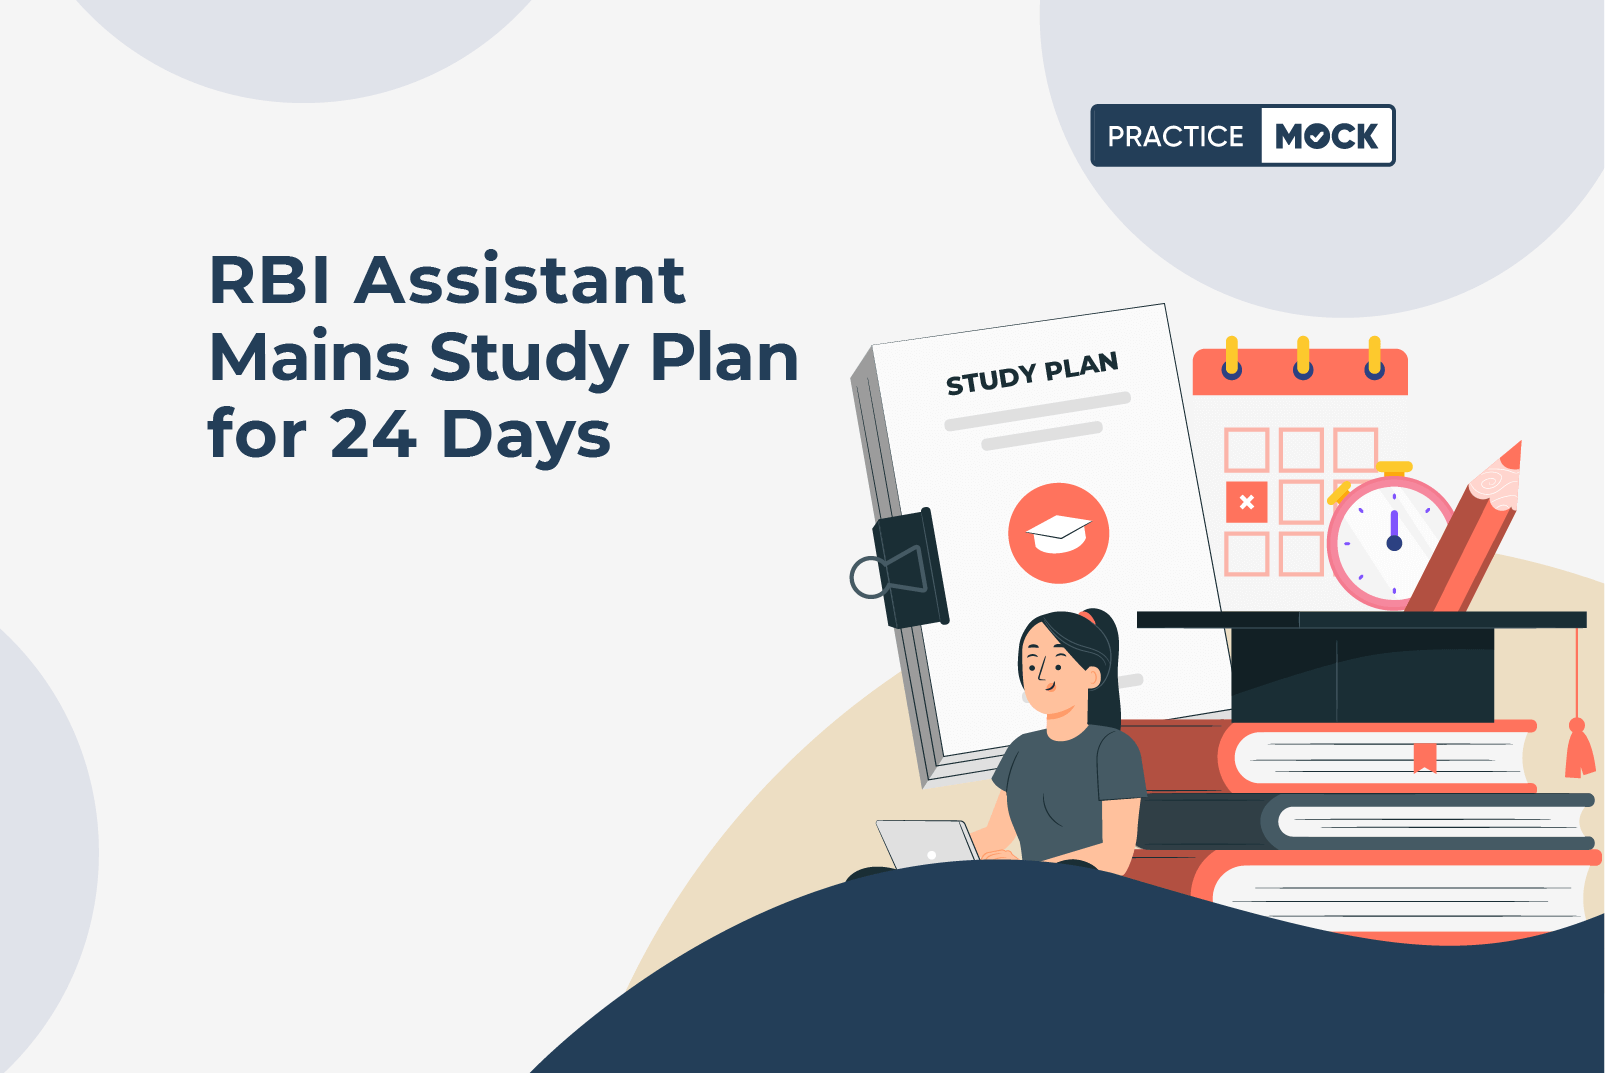 RBI Assistant Mains Study Plan for 24 Days